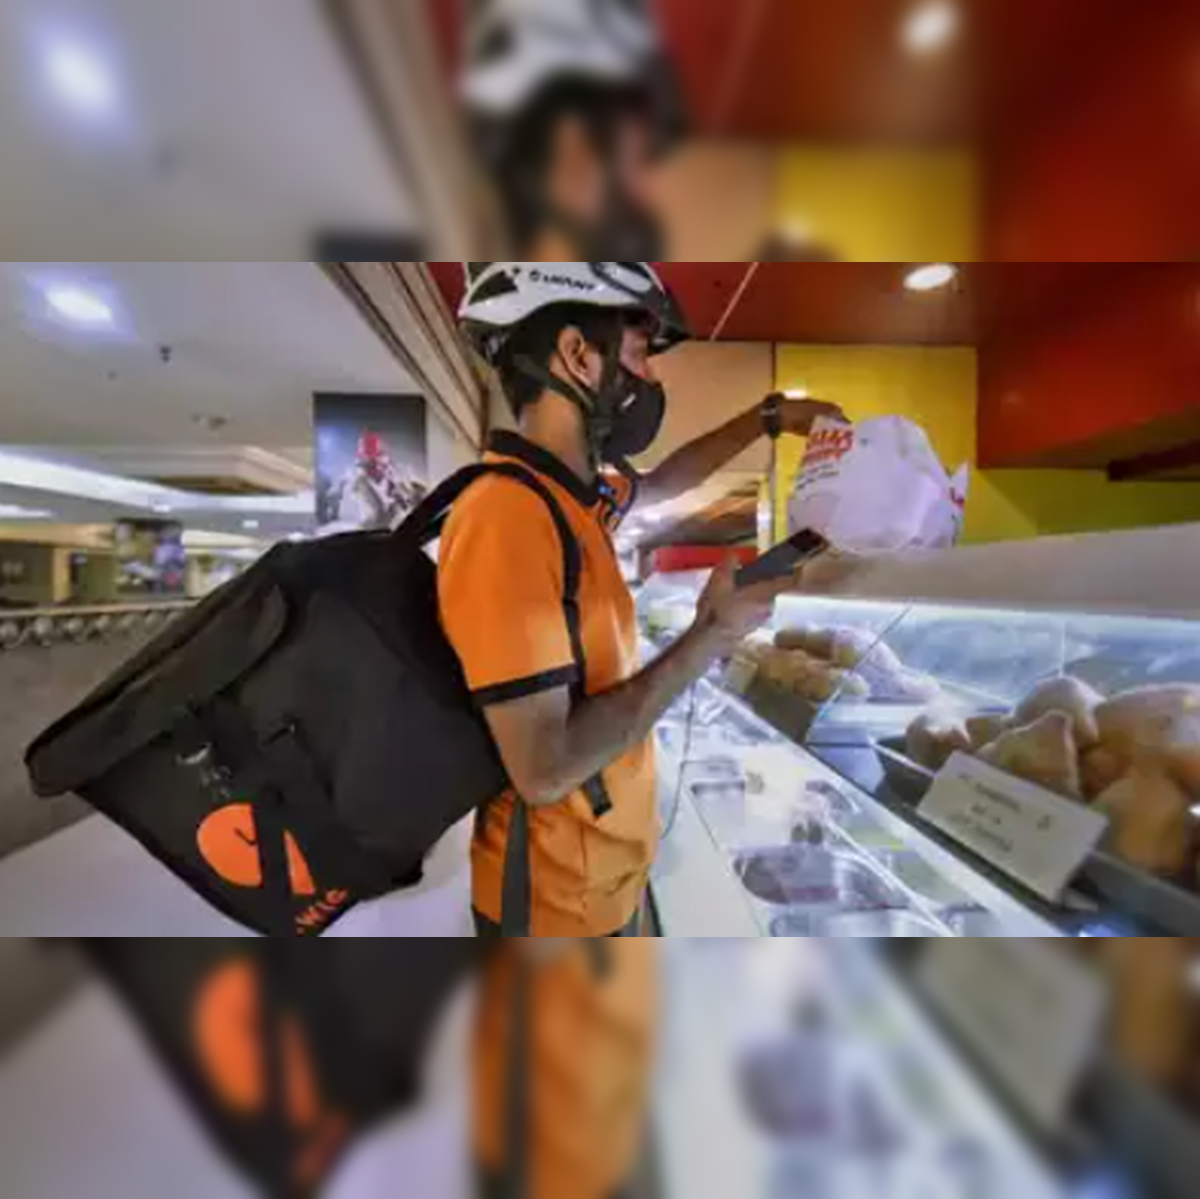 Swiggy lays off 380 employees to cut costs